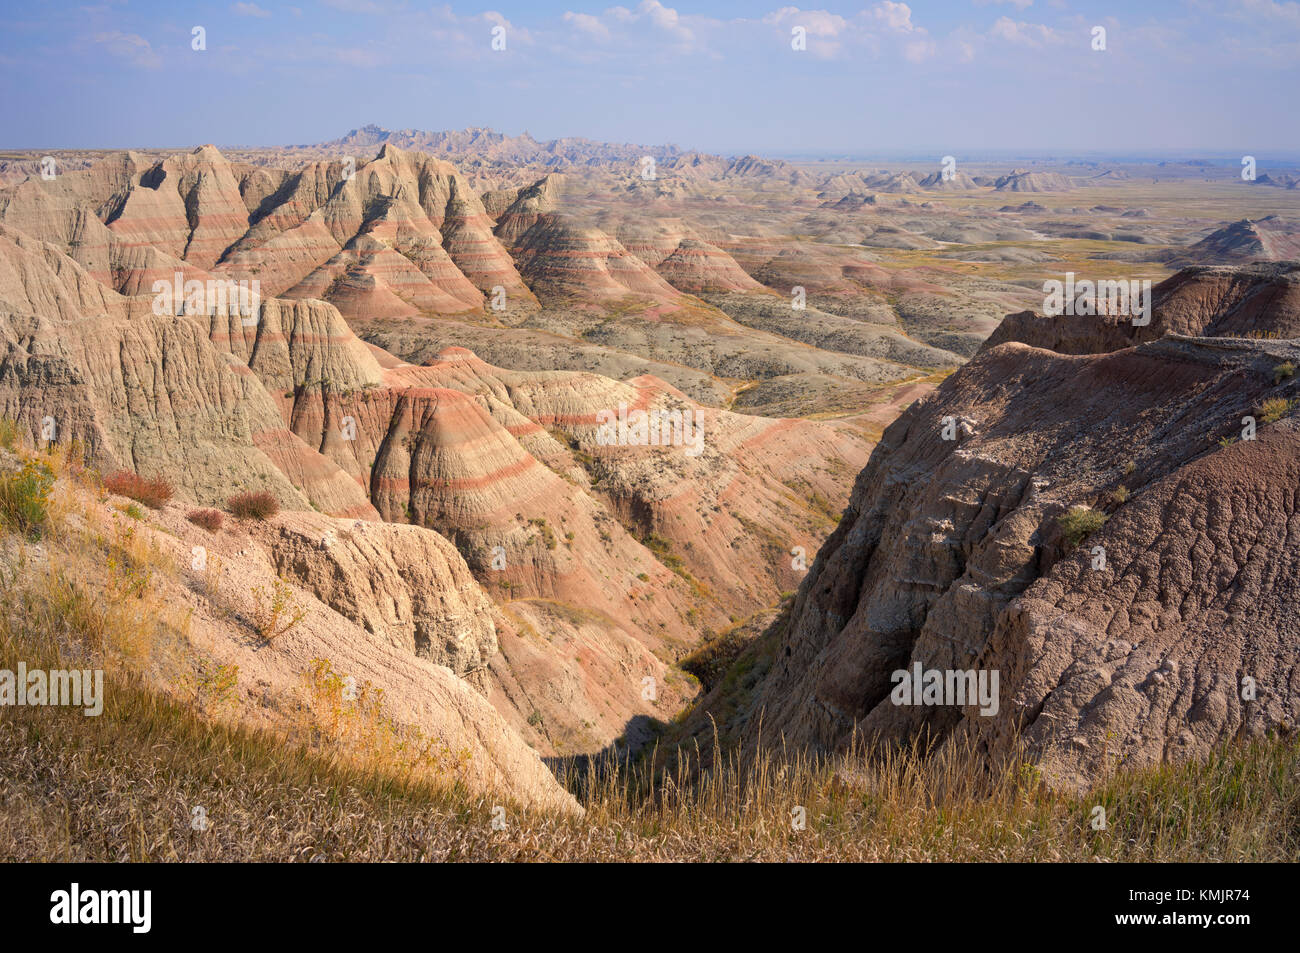 Badlands National Park, South Dakota, USA. Landscape showing the layers of different rock formations Stock Photo